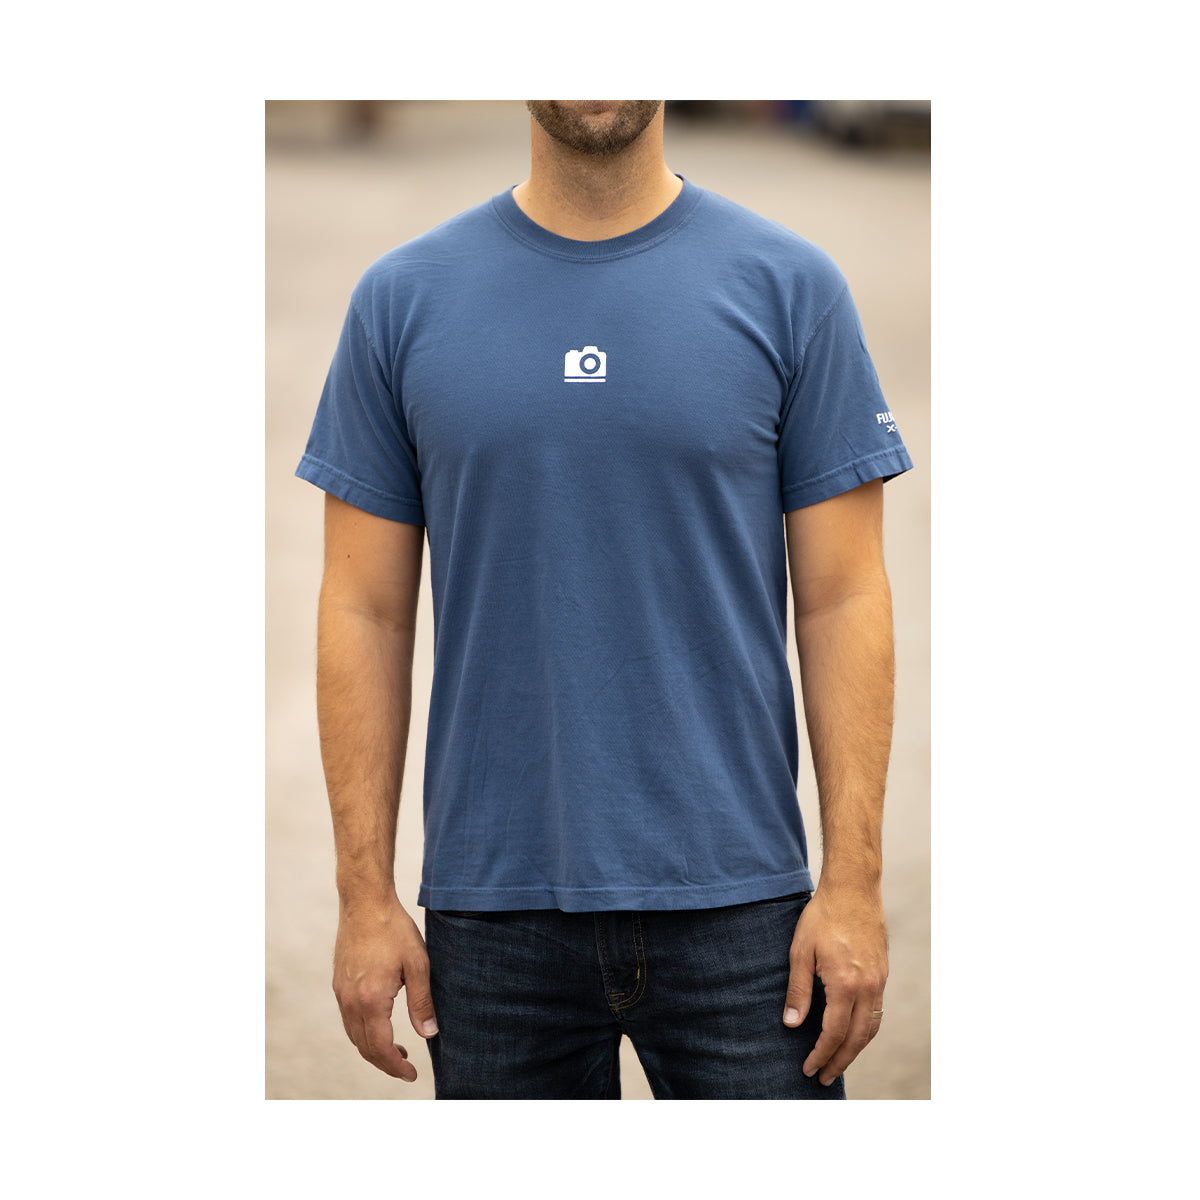 pictureline Apparel: Spring 2020 Short Sleeve Shirt Small (Blue)